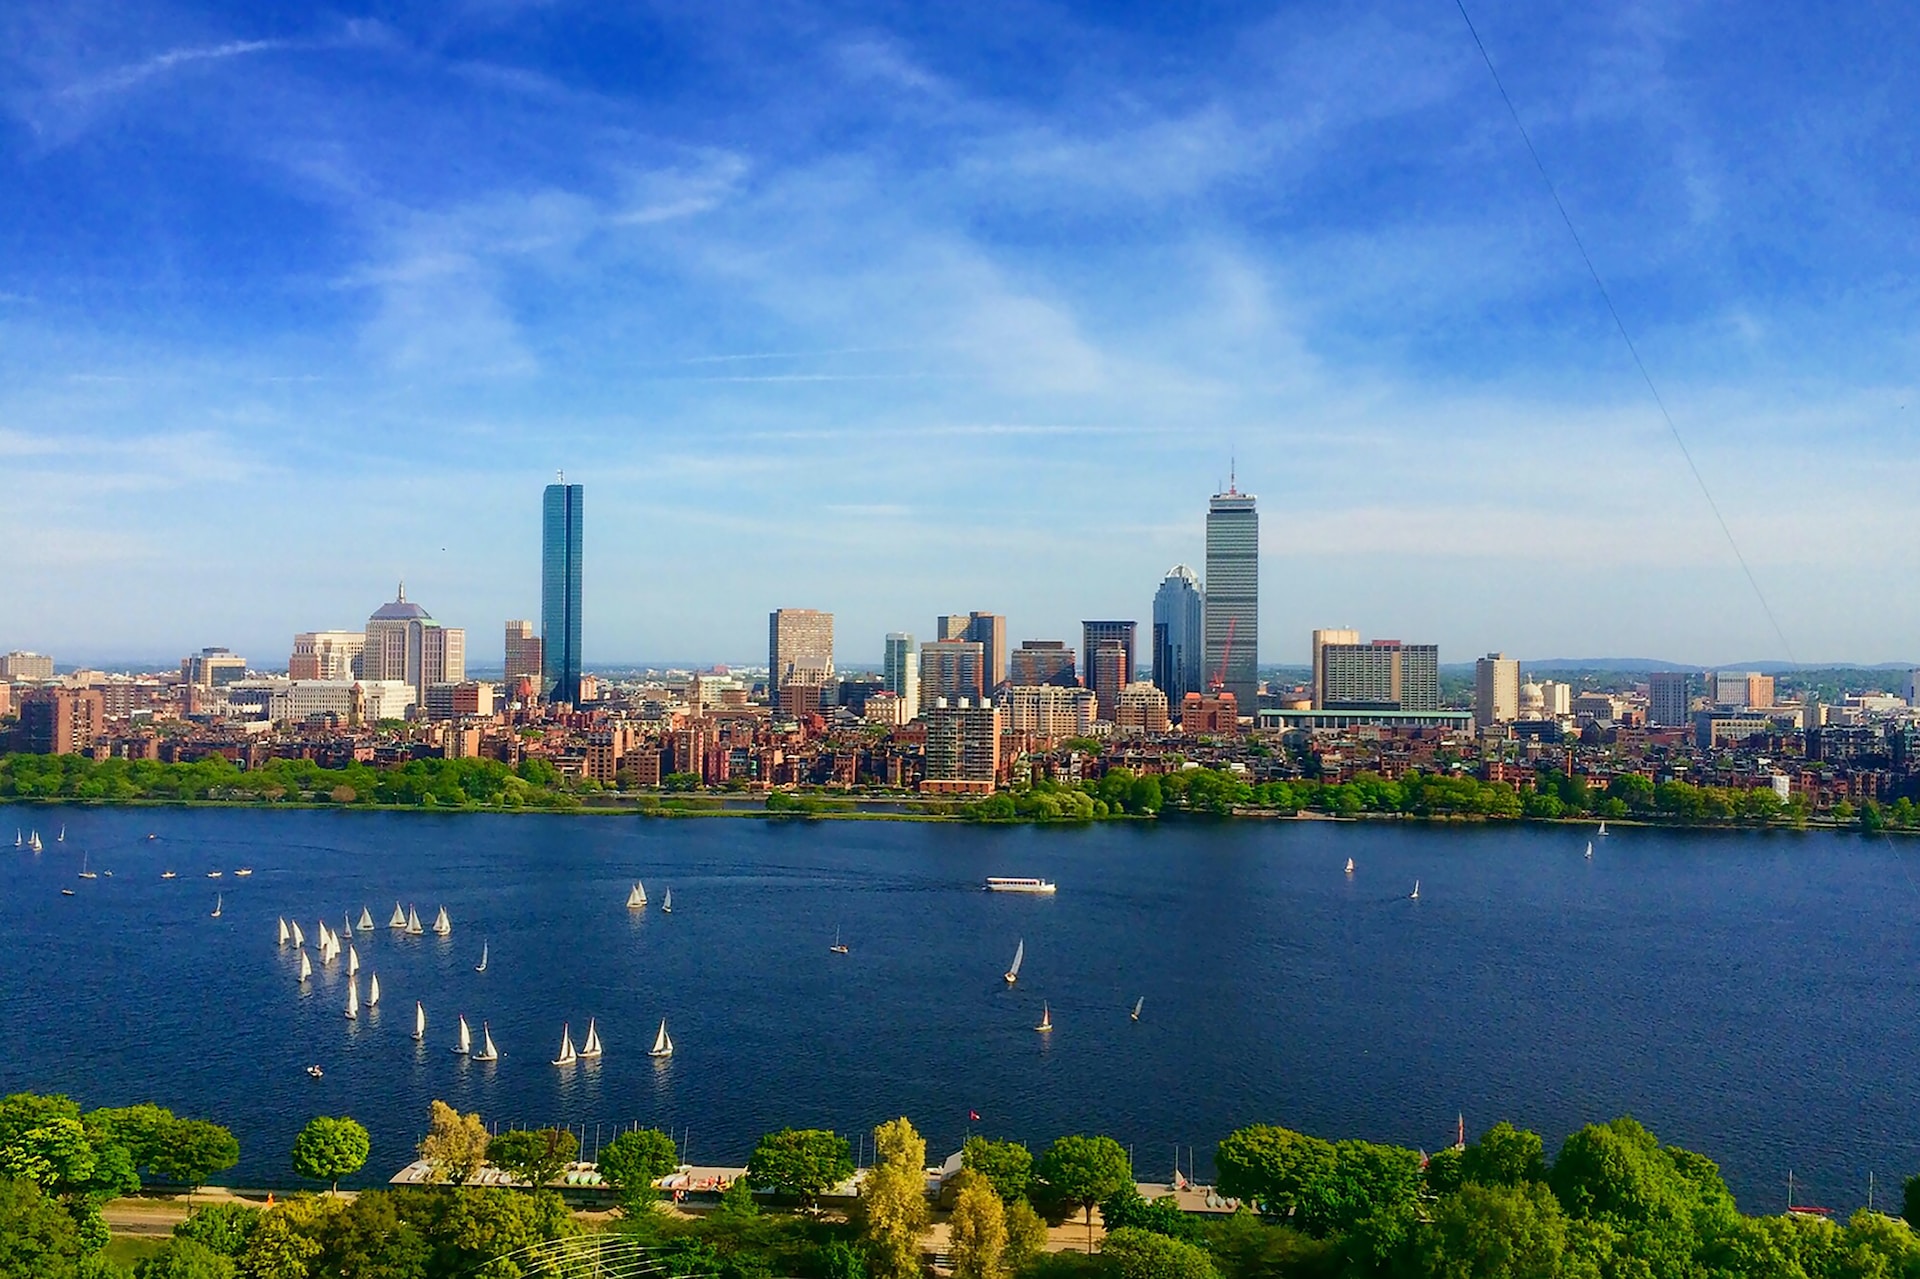 View of Boston skyline during a sunny day